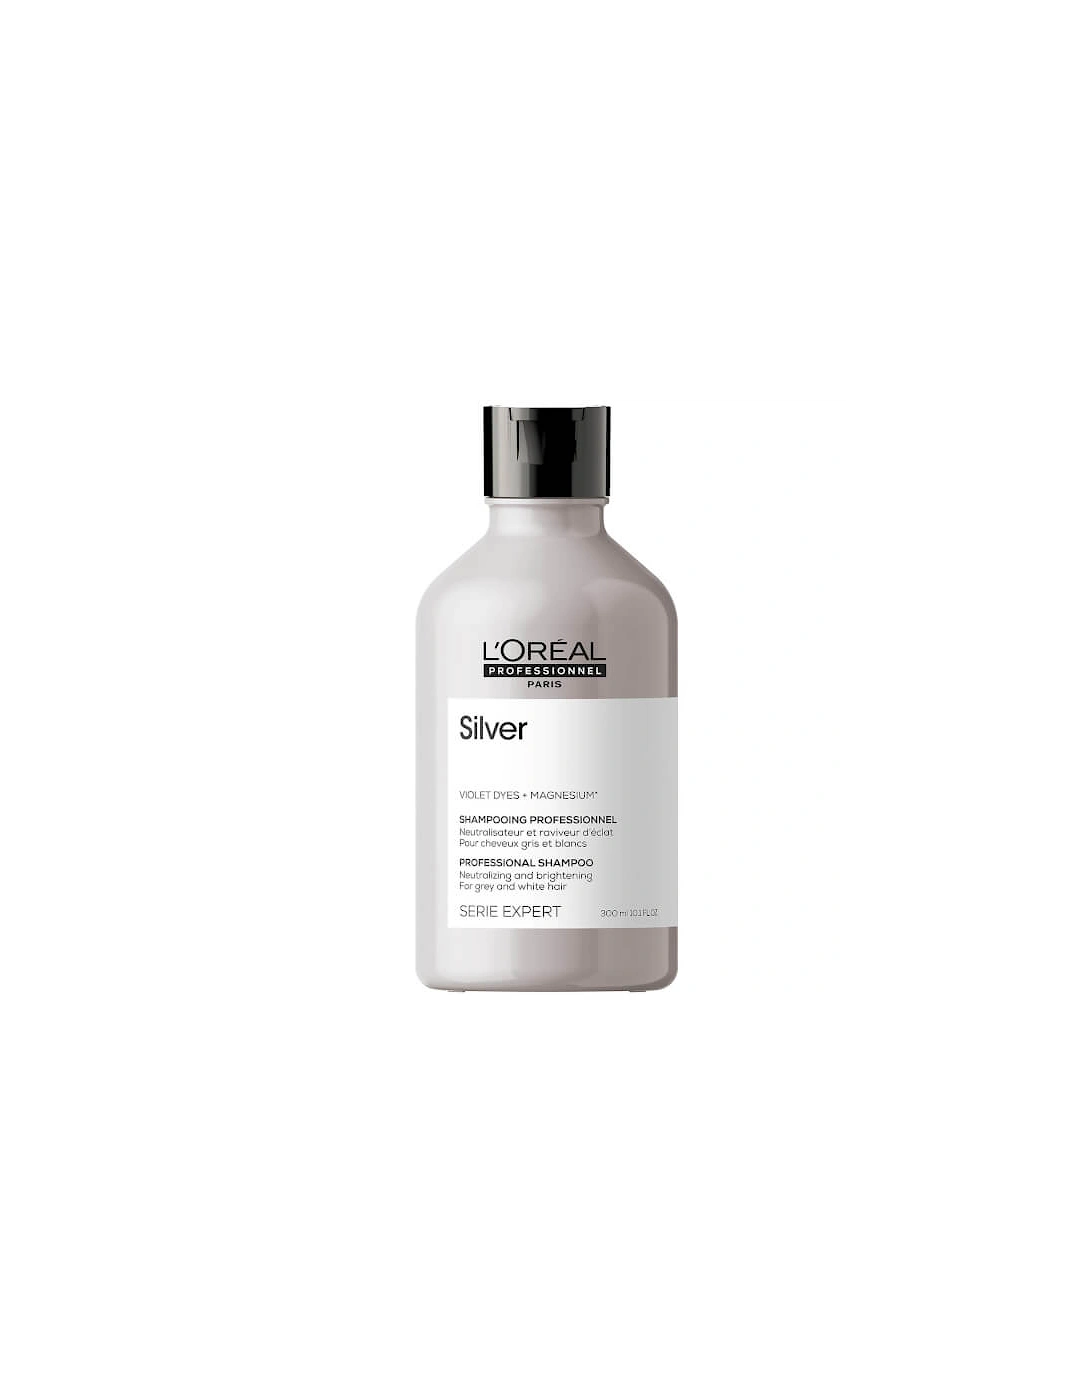 Professionnel Serie Expert Silver Shampoo 300ml - Professionnel - Professionnel Serie Expert Silver 300ml - Georgia - L'Oreal Serie Expert Silver Shampoo 250ml - Suse, 2 of 1